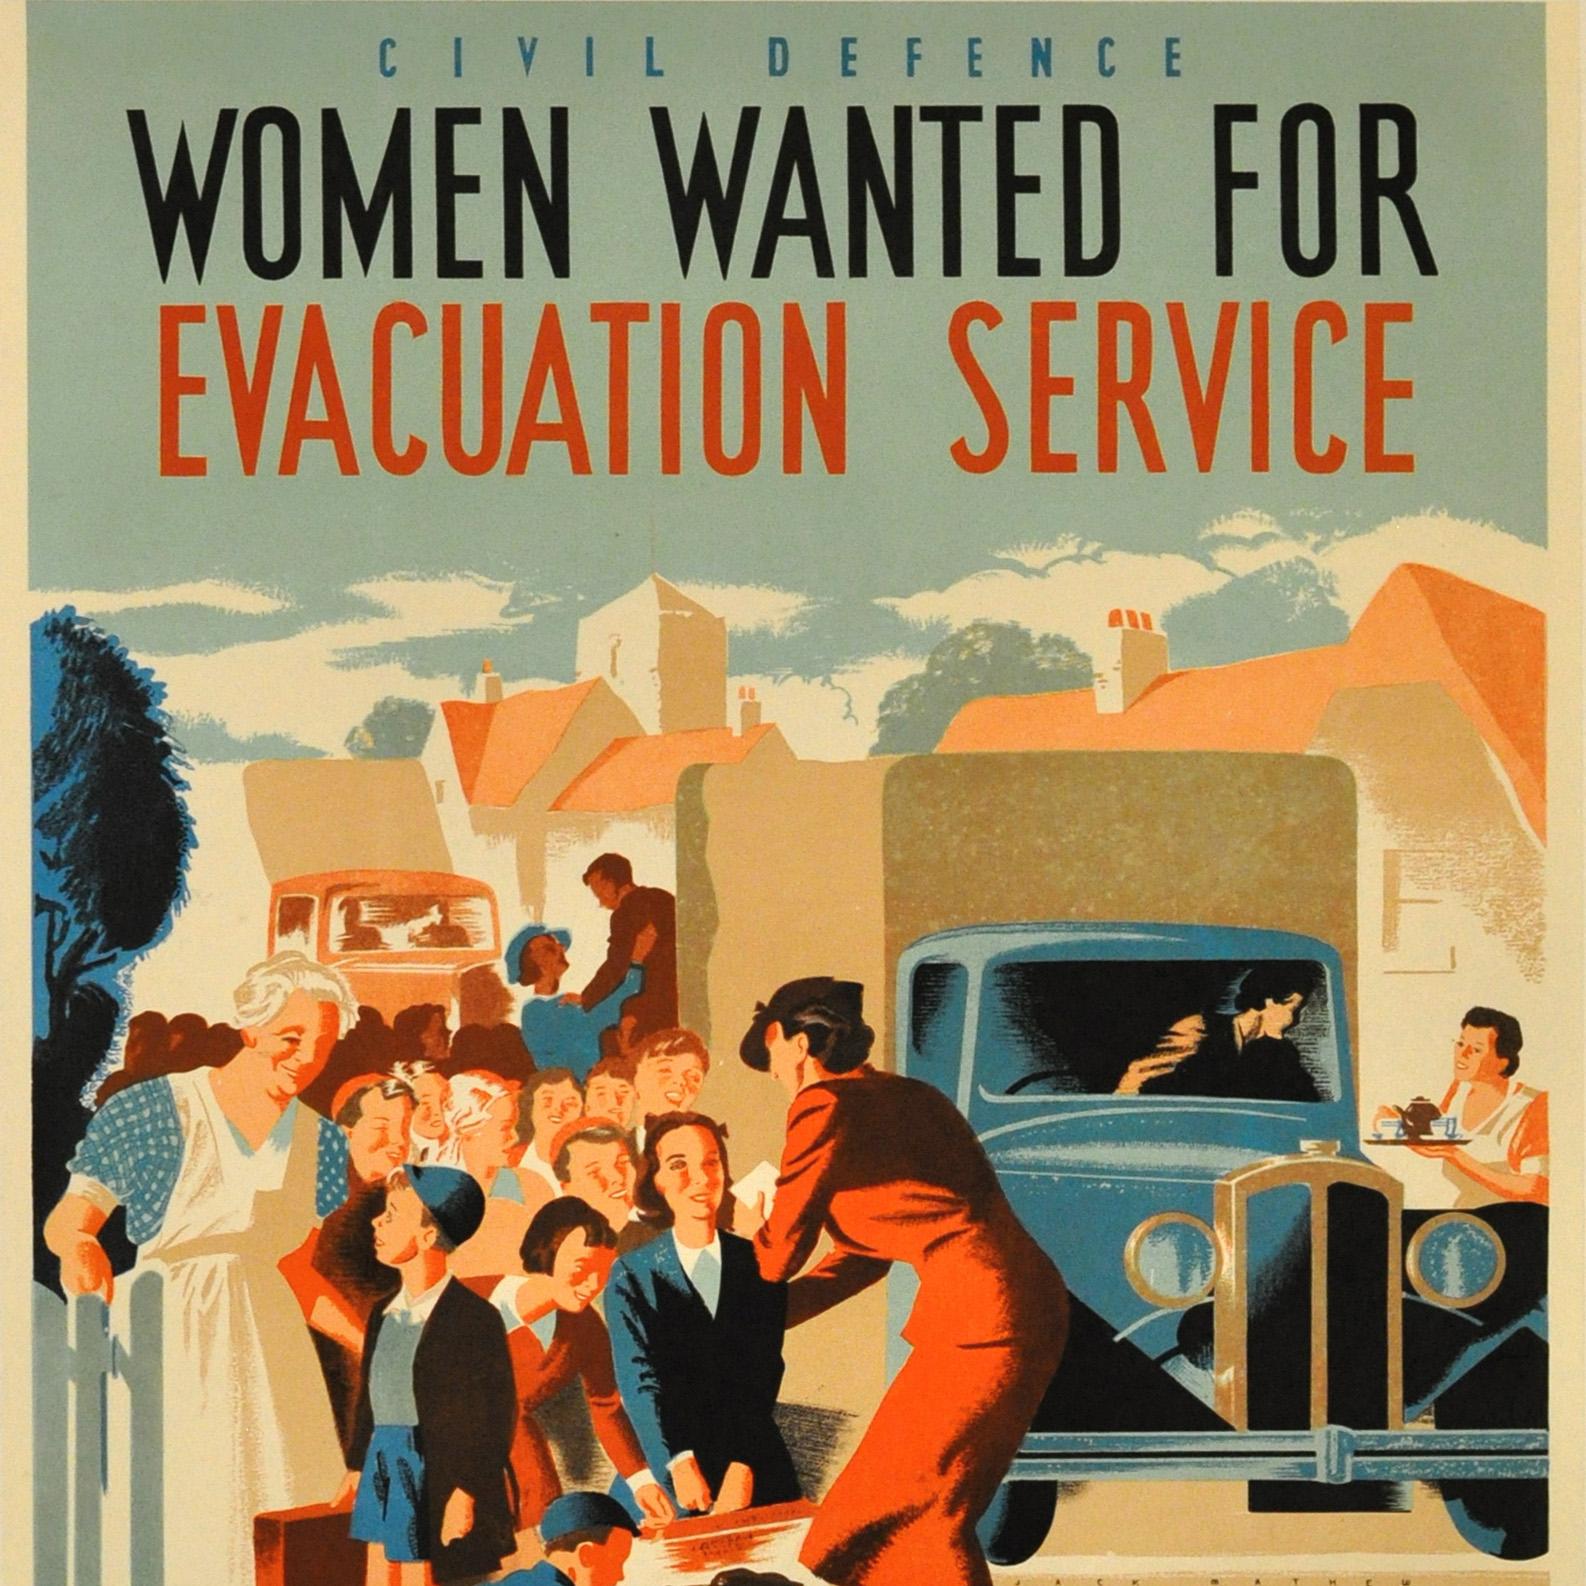 Original World War Two Poster: Civil Defence Women Wanted For Evacuation Service - Print by Jack Mathew